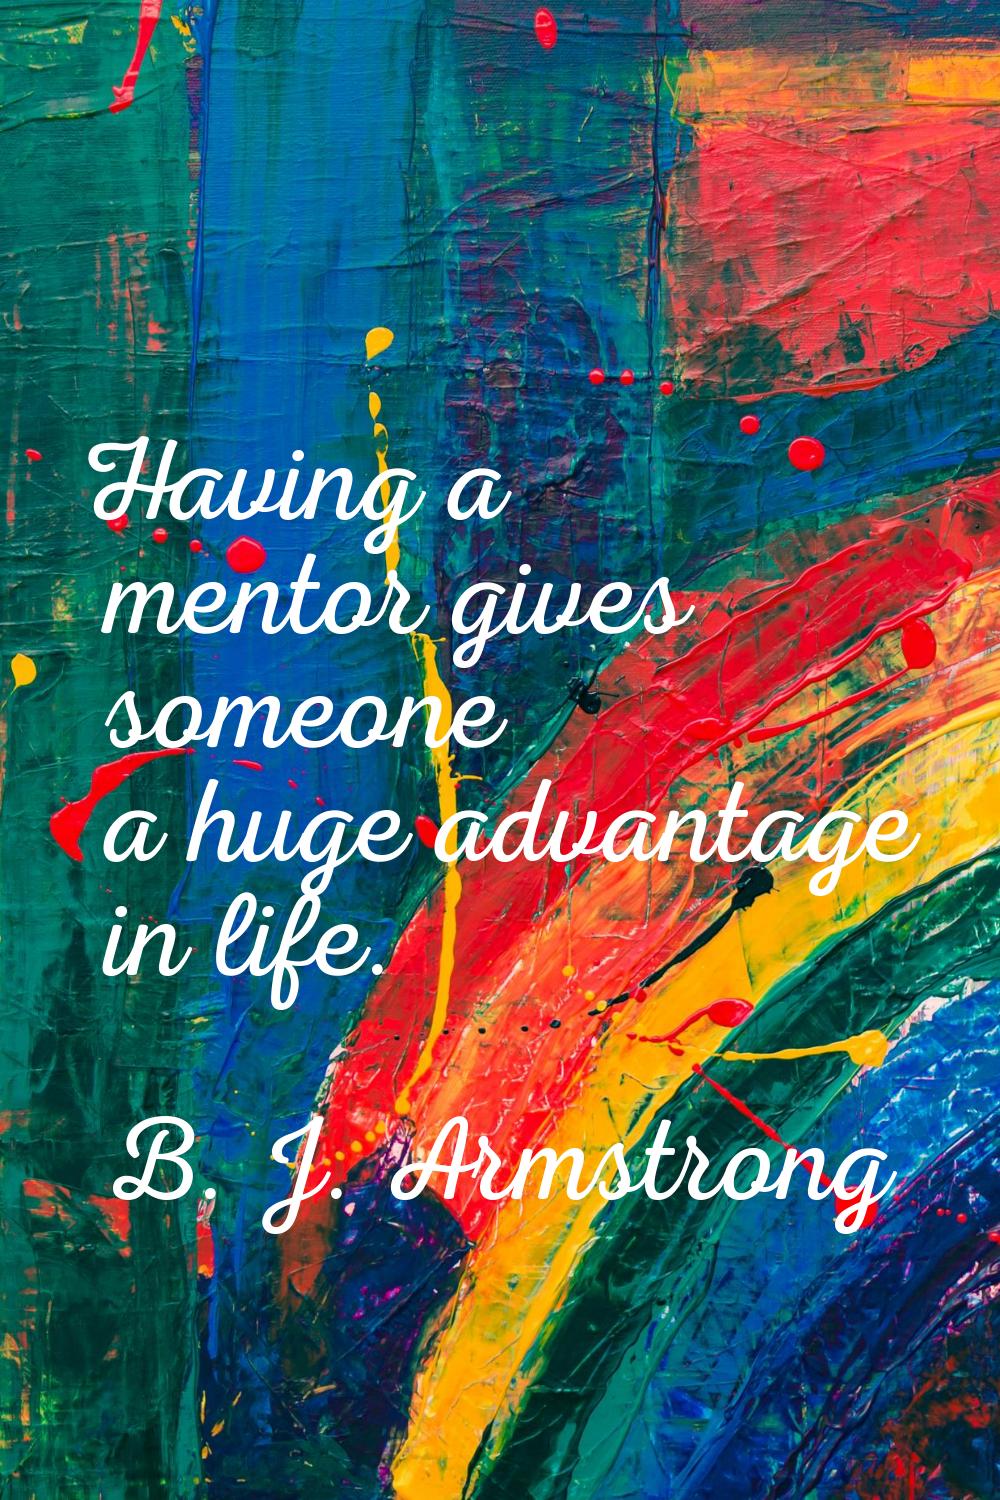 Having a mentor gives someone a huge advantage in life.